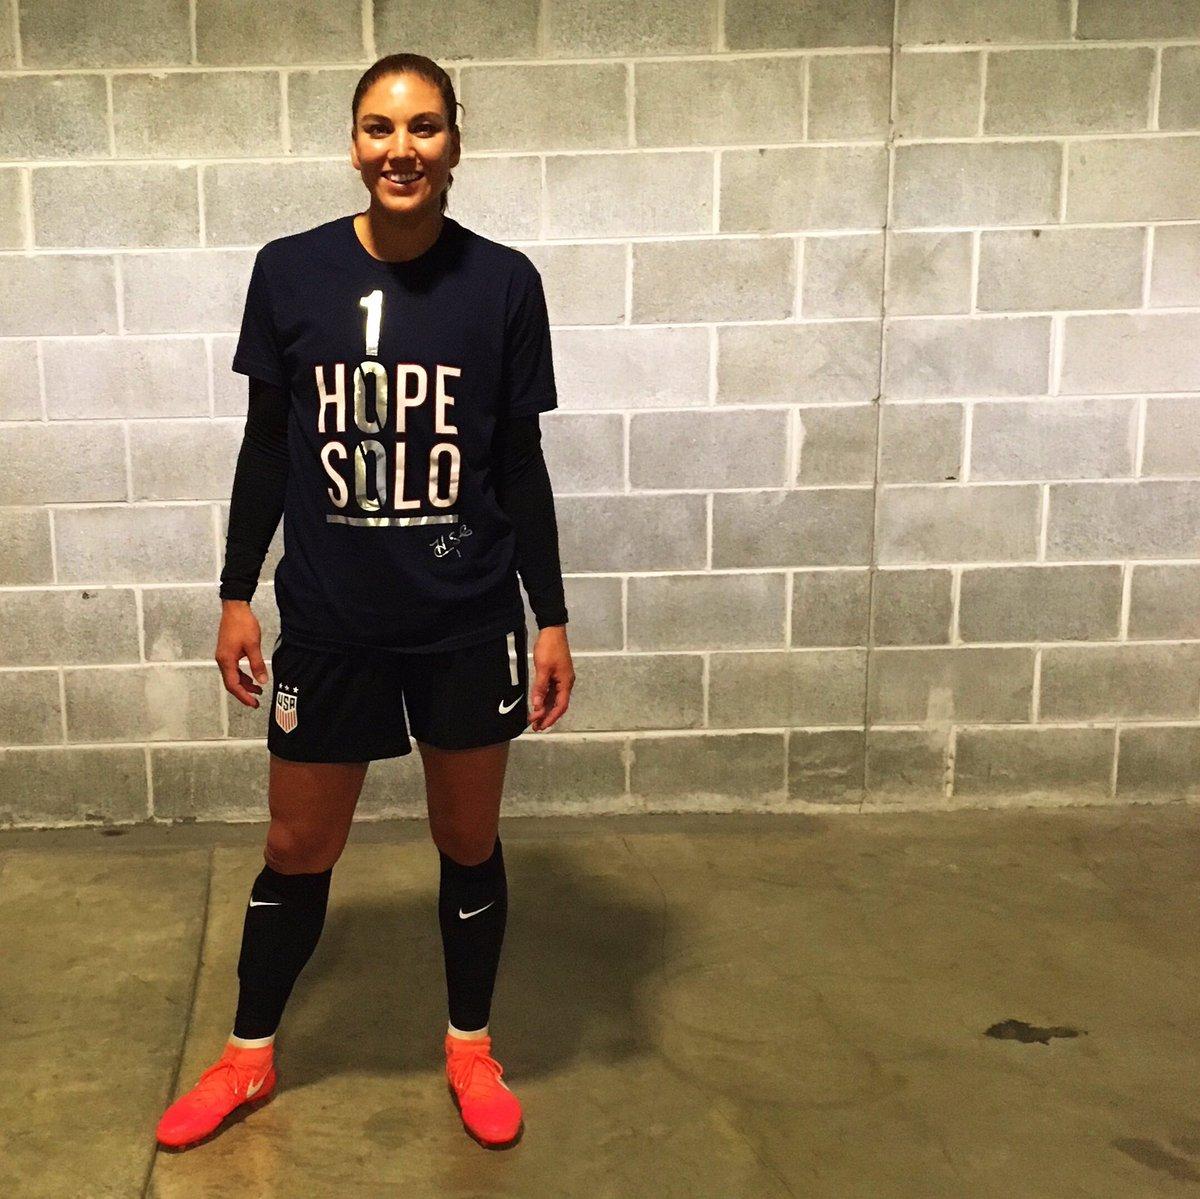 Hope Solo to my team & fans! Support